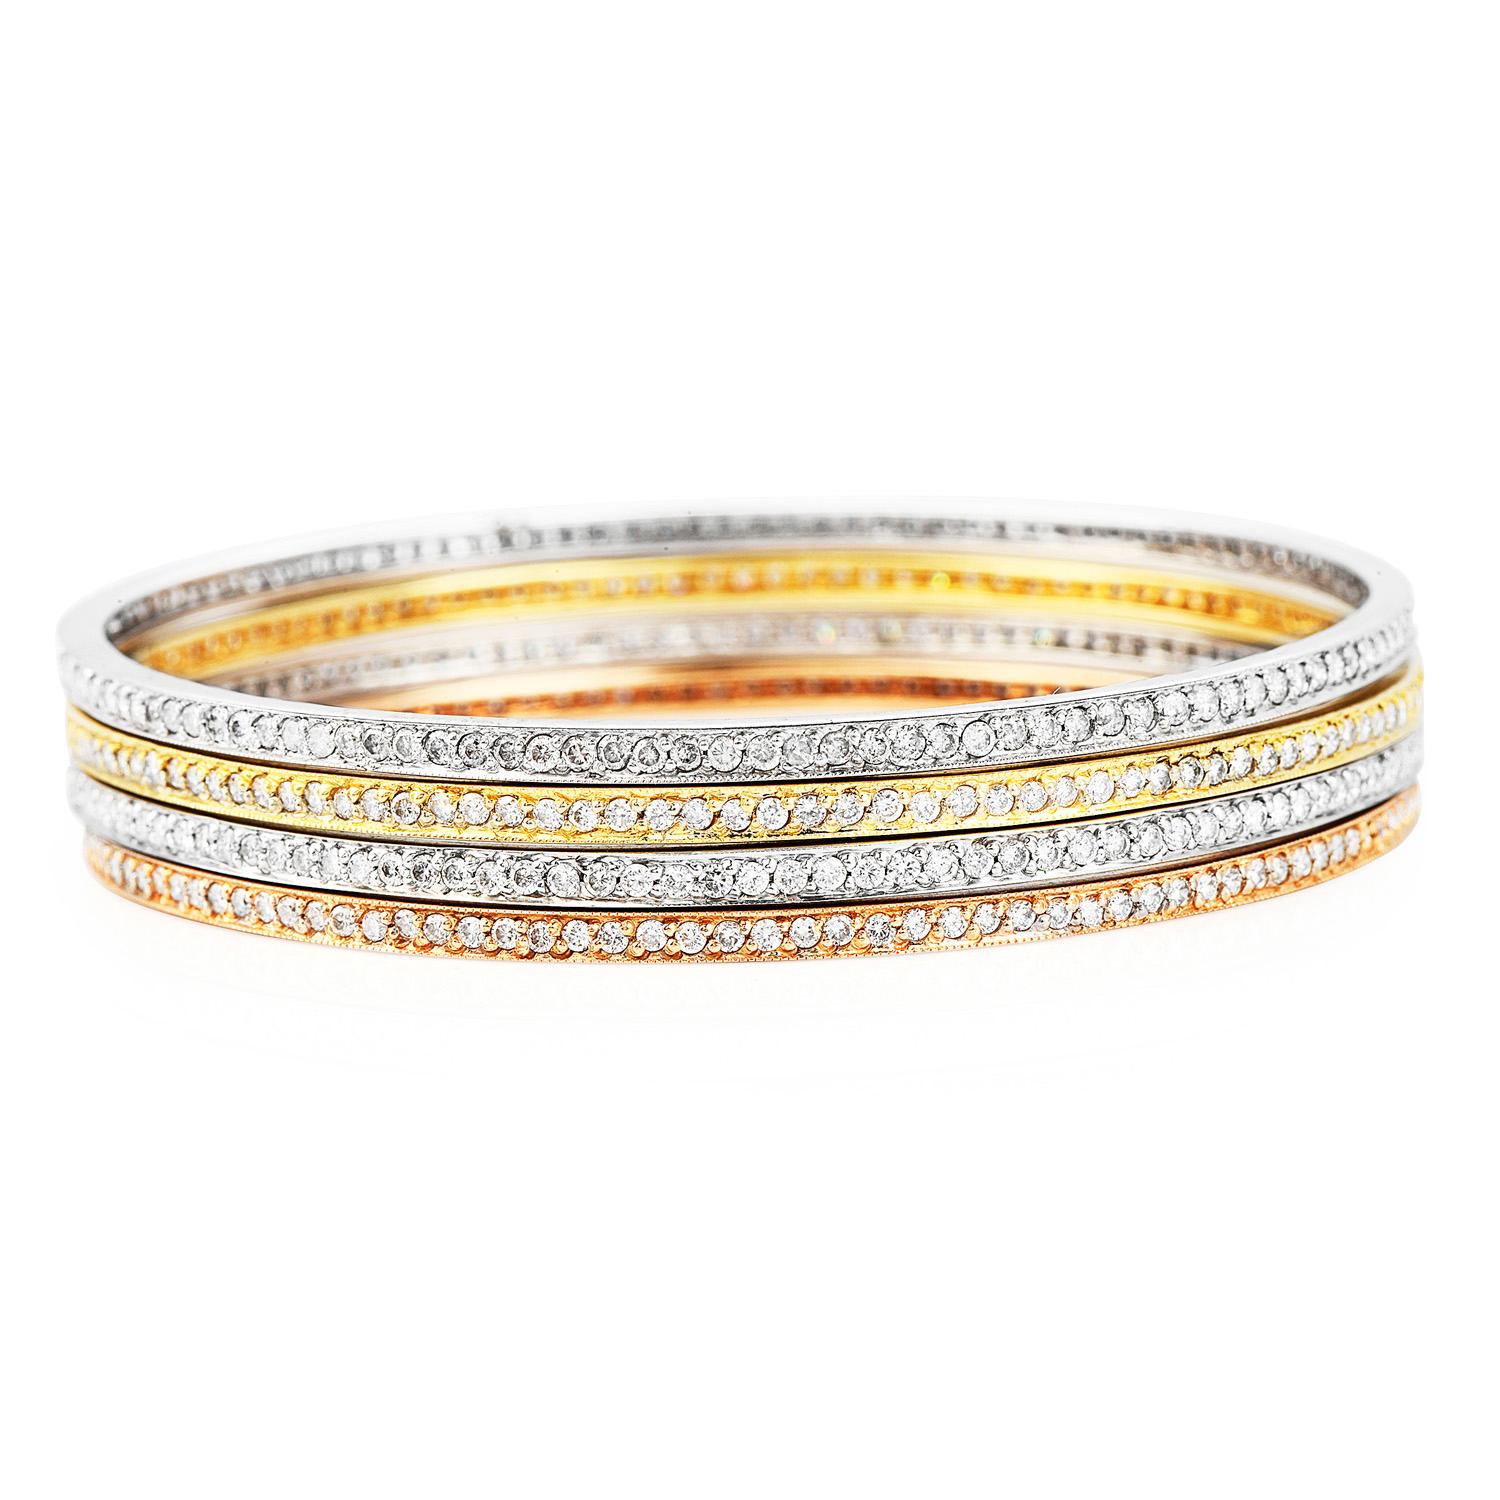 These stackable 4-eternity diamond bangles bracelets are crafted in 18 karat yellow, rose and white gold, weighing 40.6 grams in total and measuring 7 inches around the waist circumference, with a width of 11 mm. 

Each bangle set throughout with